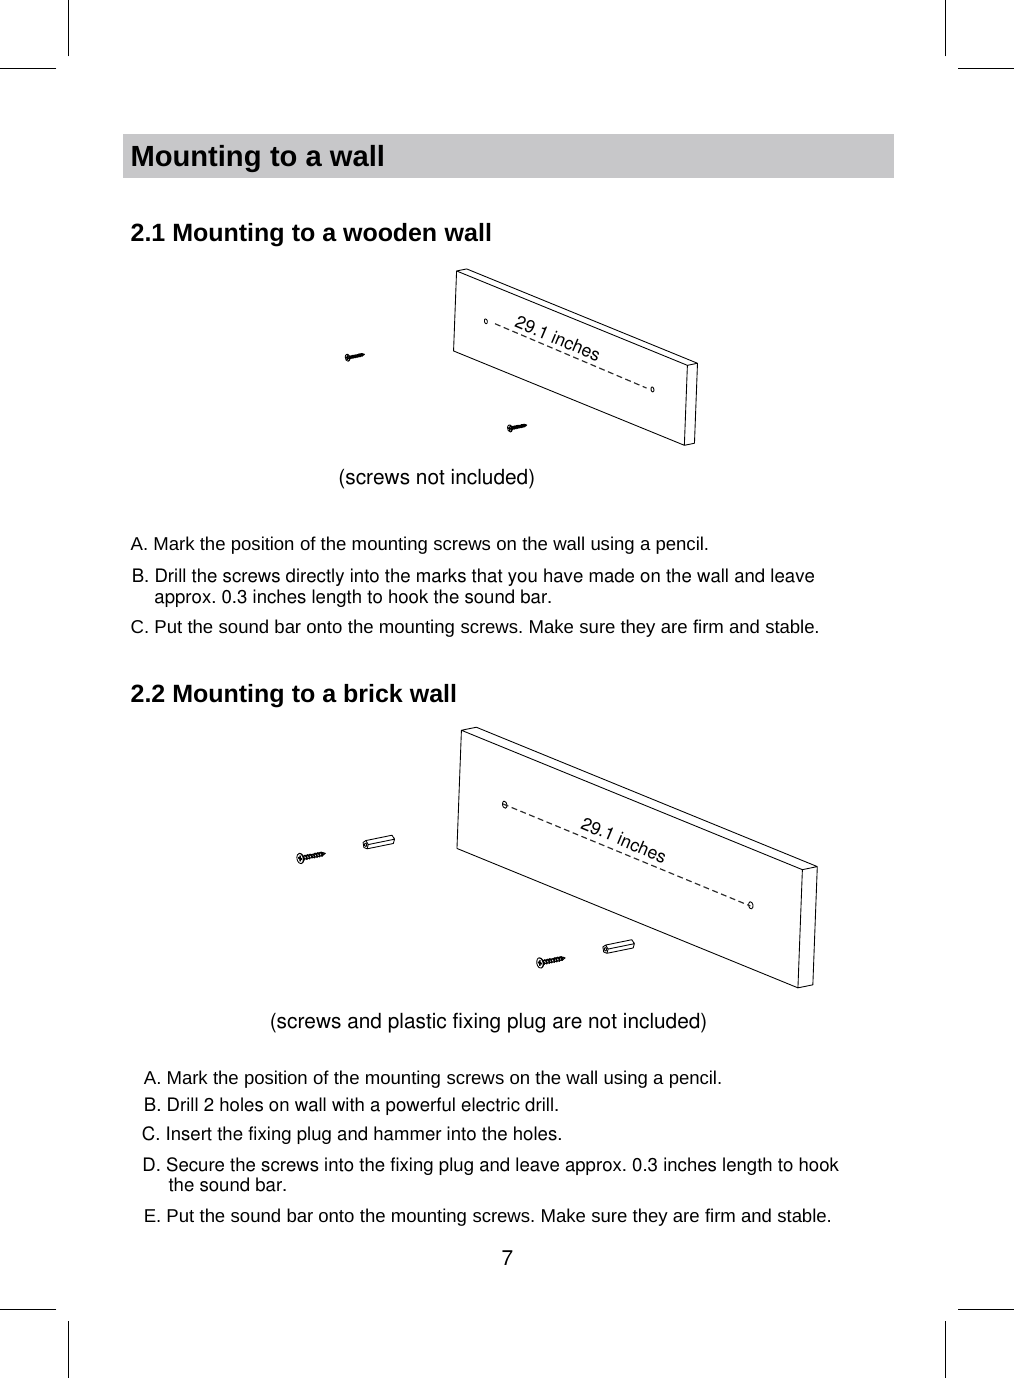 Mounting to a wall2.1 Mountingto a wooden wallA. Mark the position of the mounting screws on the wall using a pencil.C. Put the sound bar onto the mounting screws. Make sure they are firm and stable.2.2 Mountingto a brick wall29.1 inchesB. Drill the screws directly into the marks that you have made on the wall and leave approx. 0.3 inches length to hook the sound bar.(screws not included)(screws and plastic fixing plug are not included)A. Mark the position of the mounting screws on the wall using a pencil.E. Put the sound bar onto the mounting screws. Make sure they are firm and stable.C. Insert the fixing plug and hammer into the holes.D. Secure the screws into the fixing plug and leave approx. 0.3 inches length to hookthe sound bar.B. Drill 2 holes on wall with a powerful electric drill. 29.1 inches7